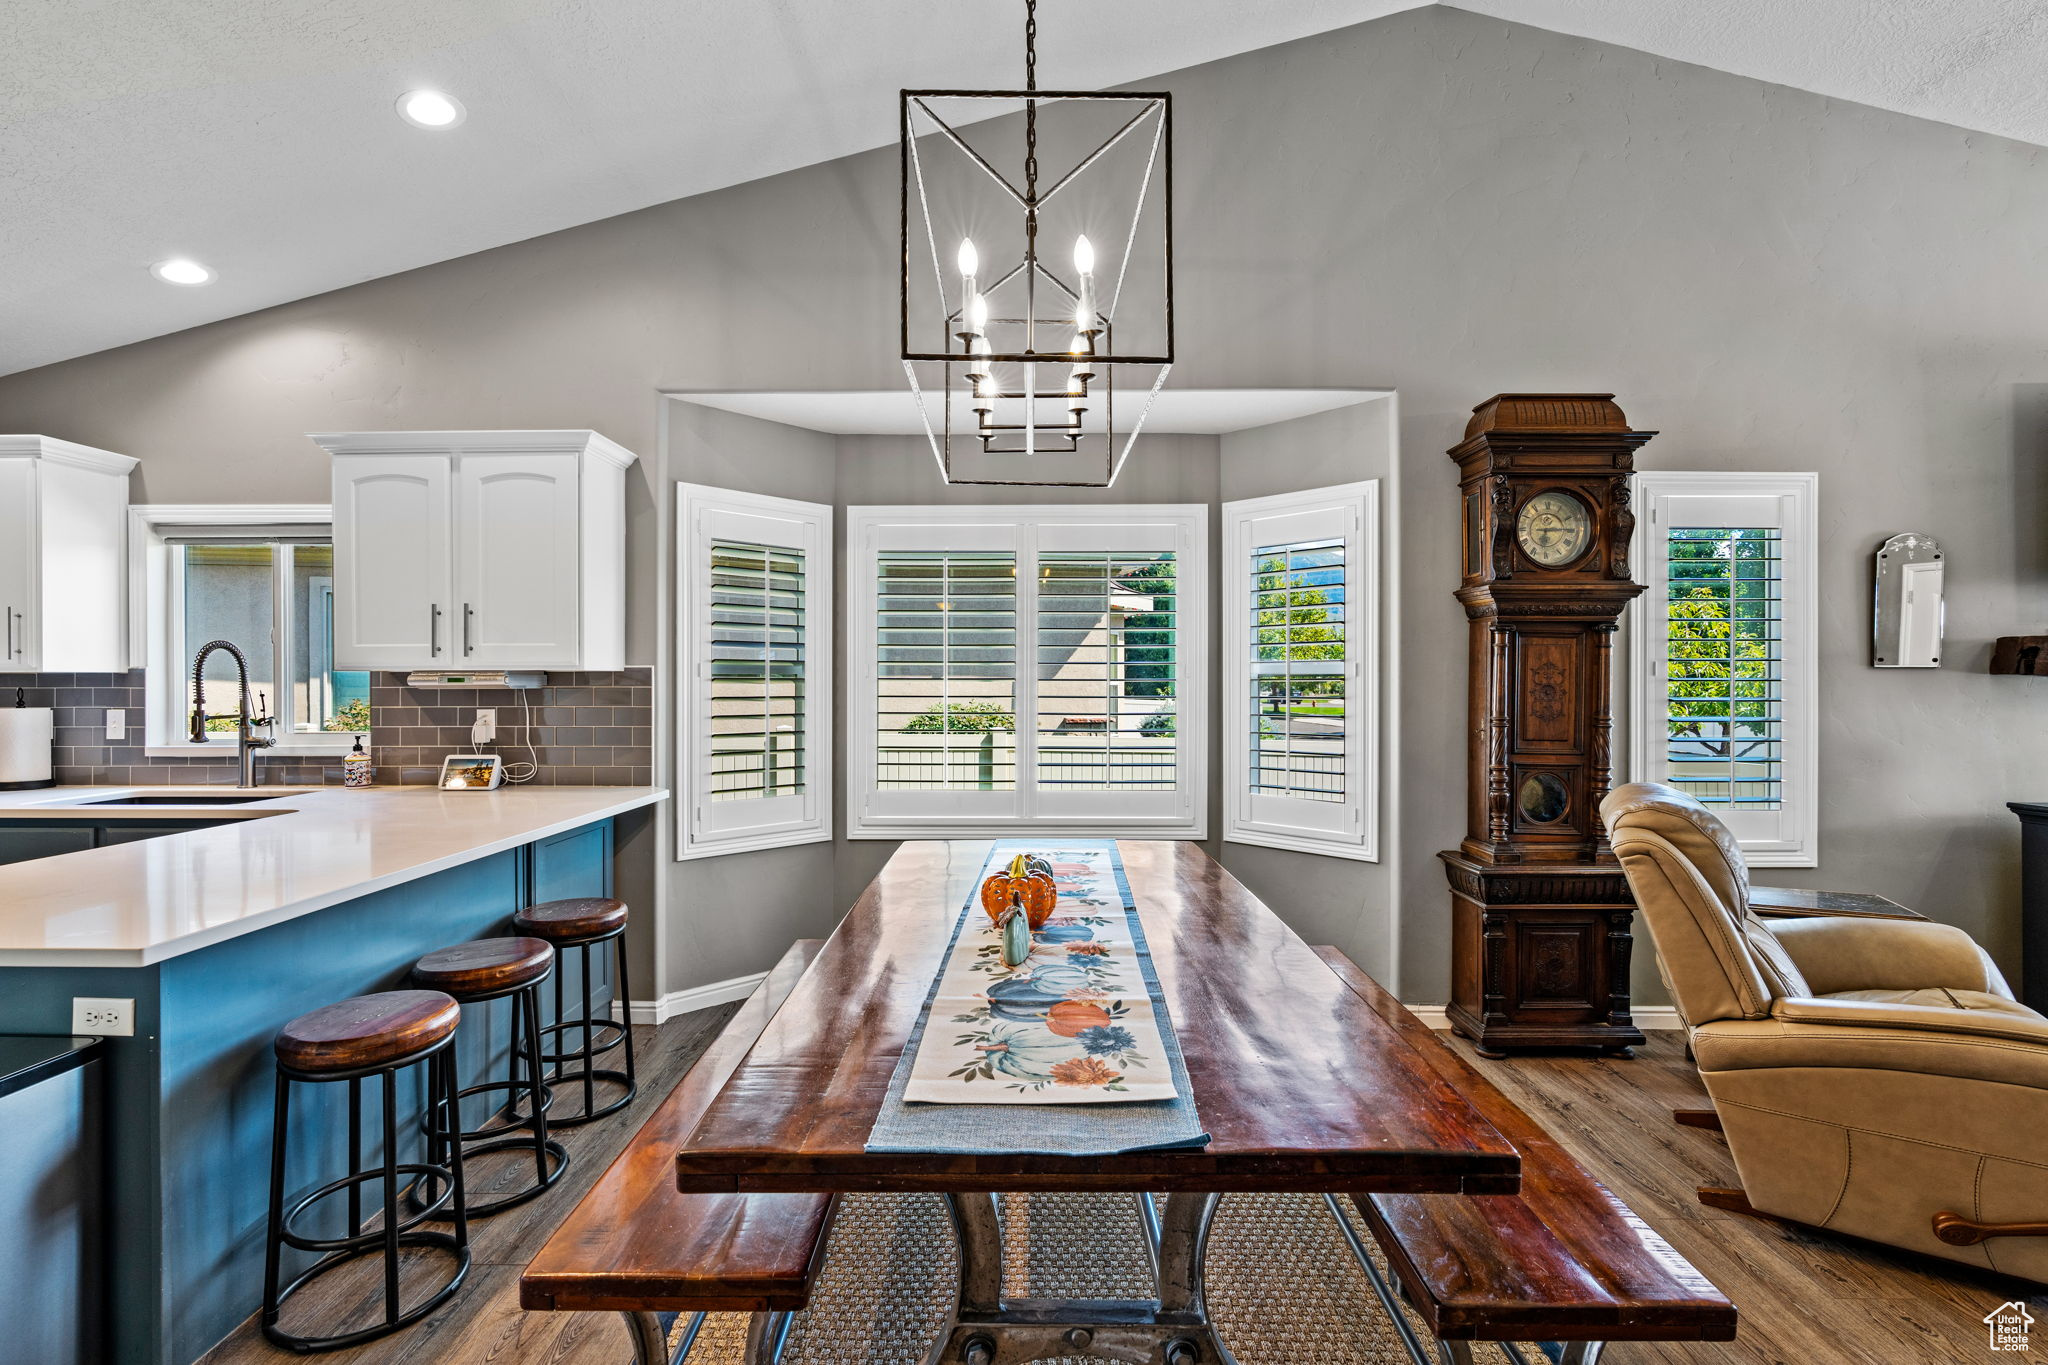 Dining space featuring hardwood / wood-style floors, sink, and high vaulted ceiling